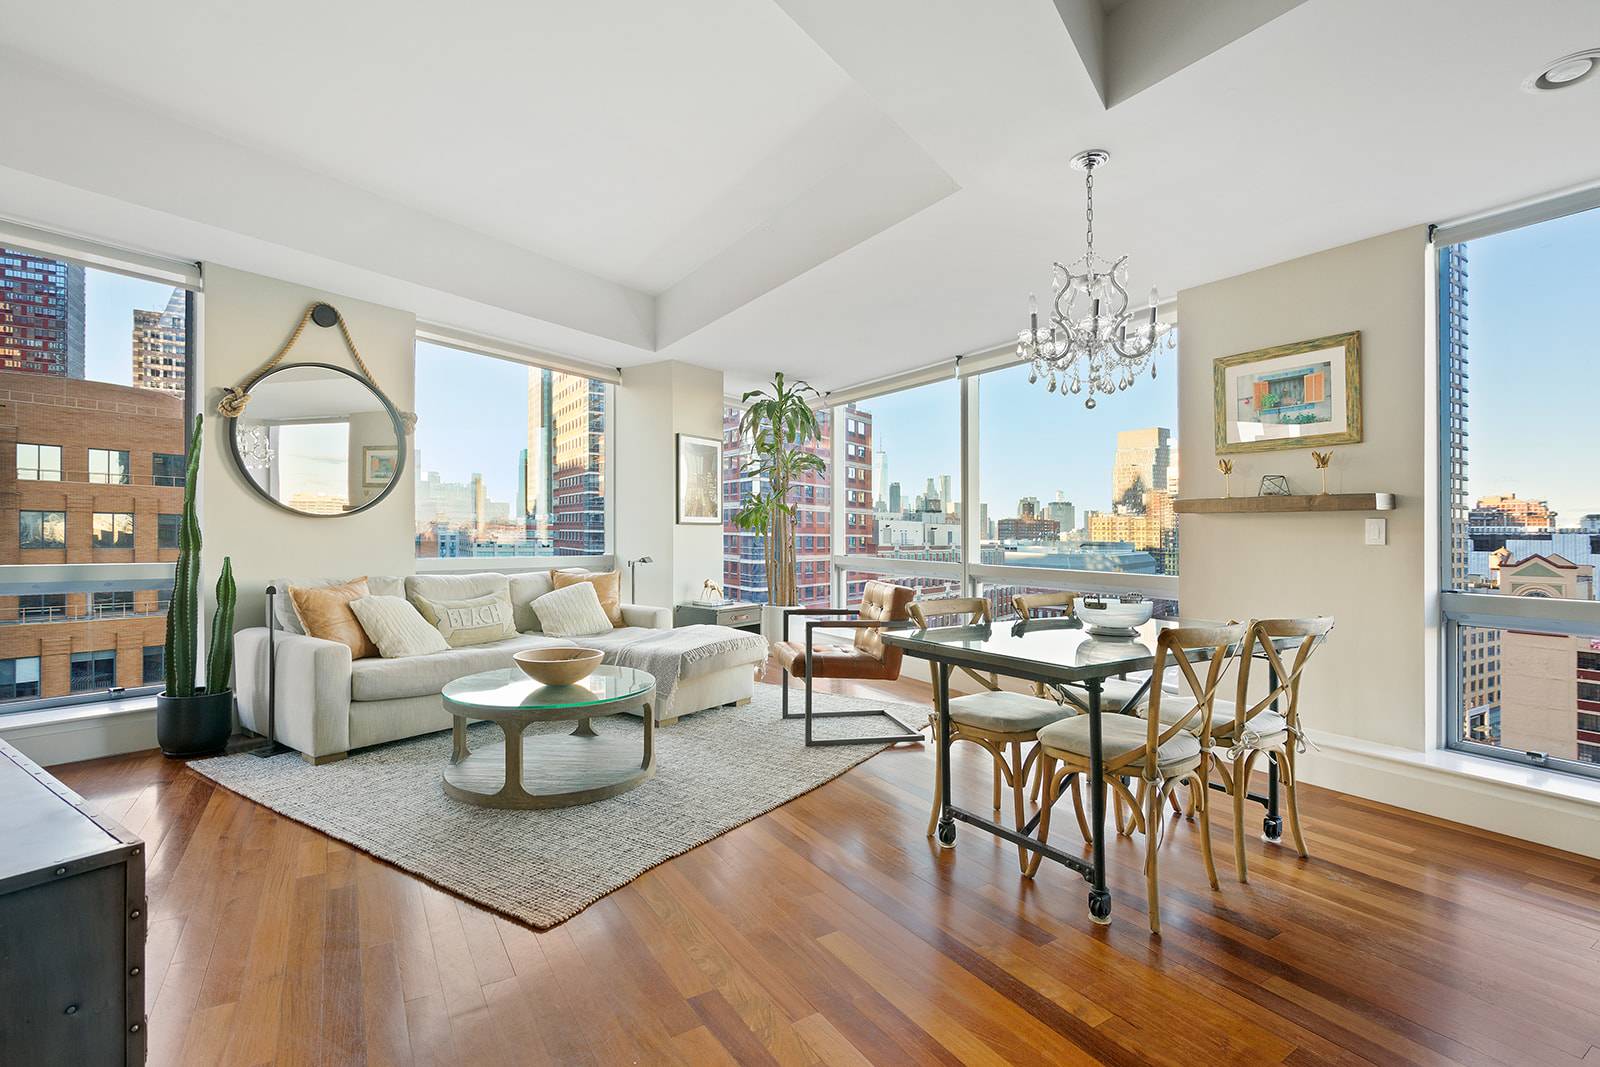 Welcome to Residence 1103, Toren's most distinguished layout, an iconic two bedroom two bath 03 line with views to match.